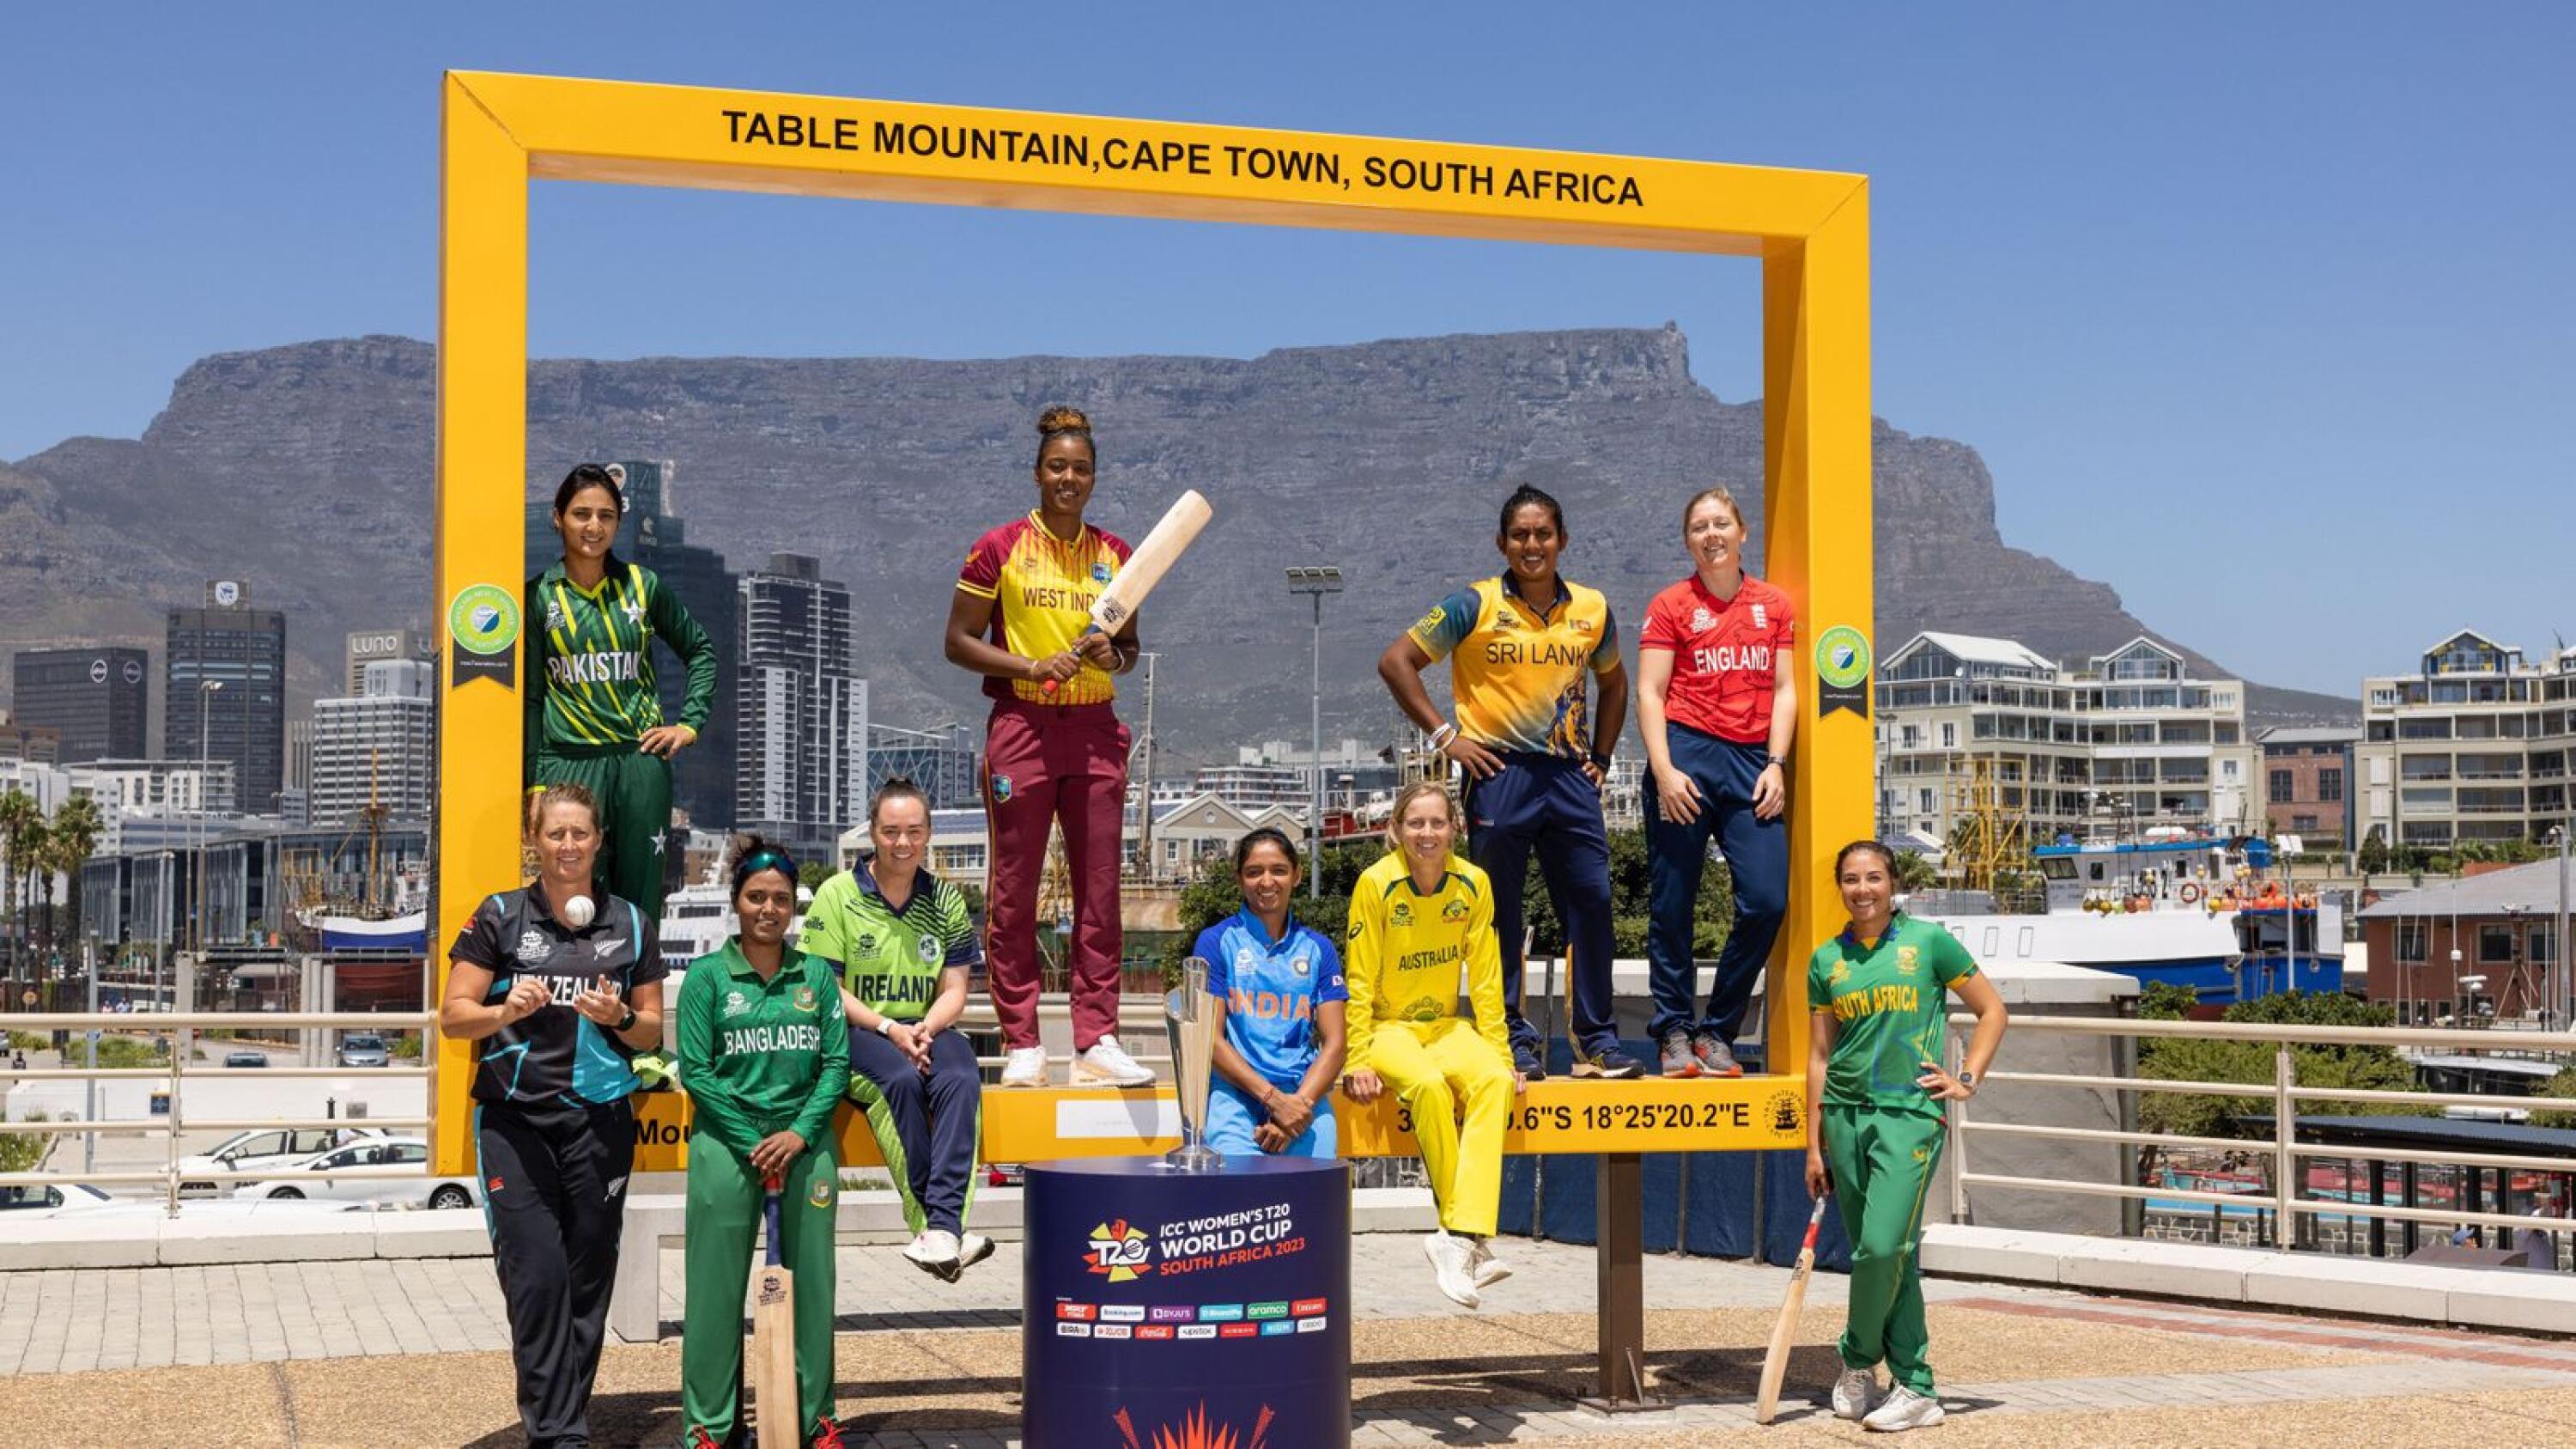 The captains for the Women’s T20 World Cup in South Africa pose for a photo at the V&A Waterfront in Cape Town